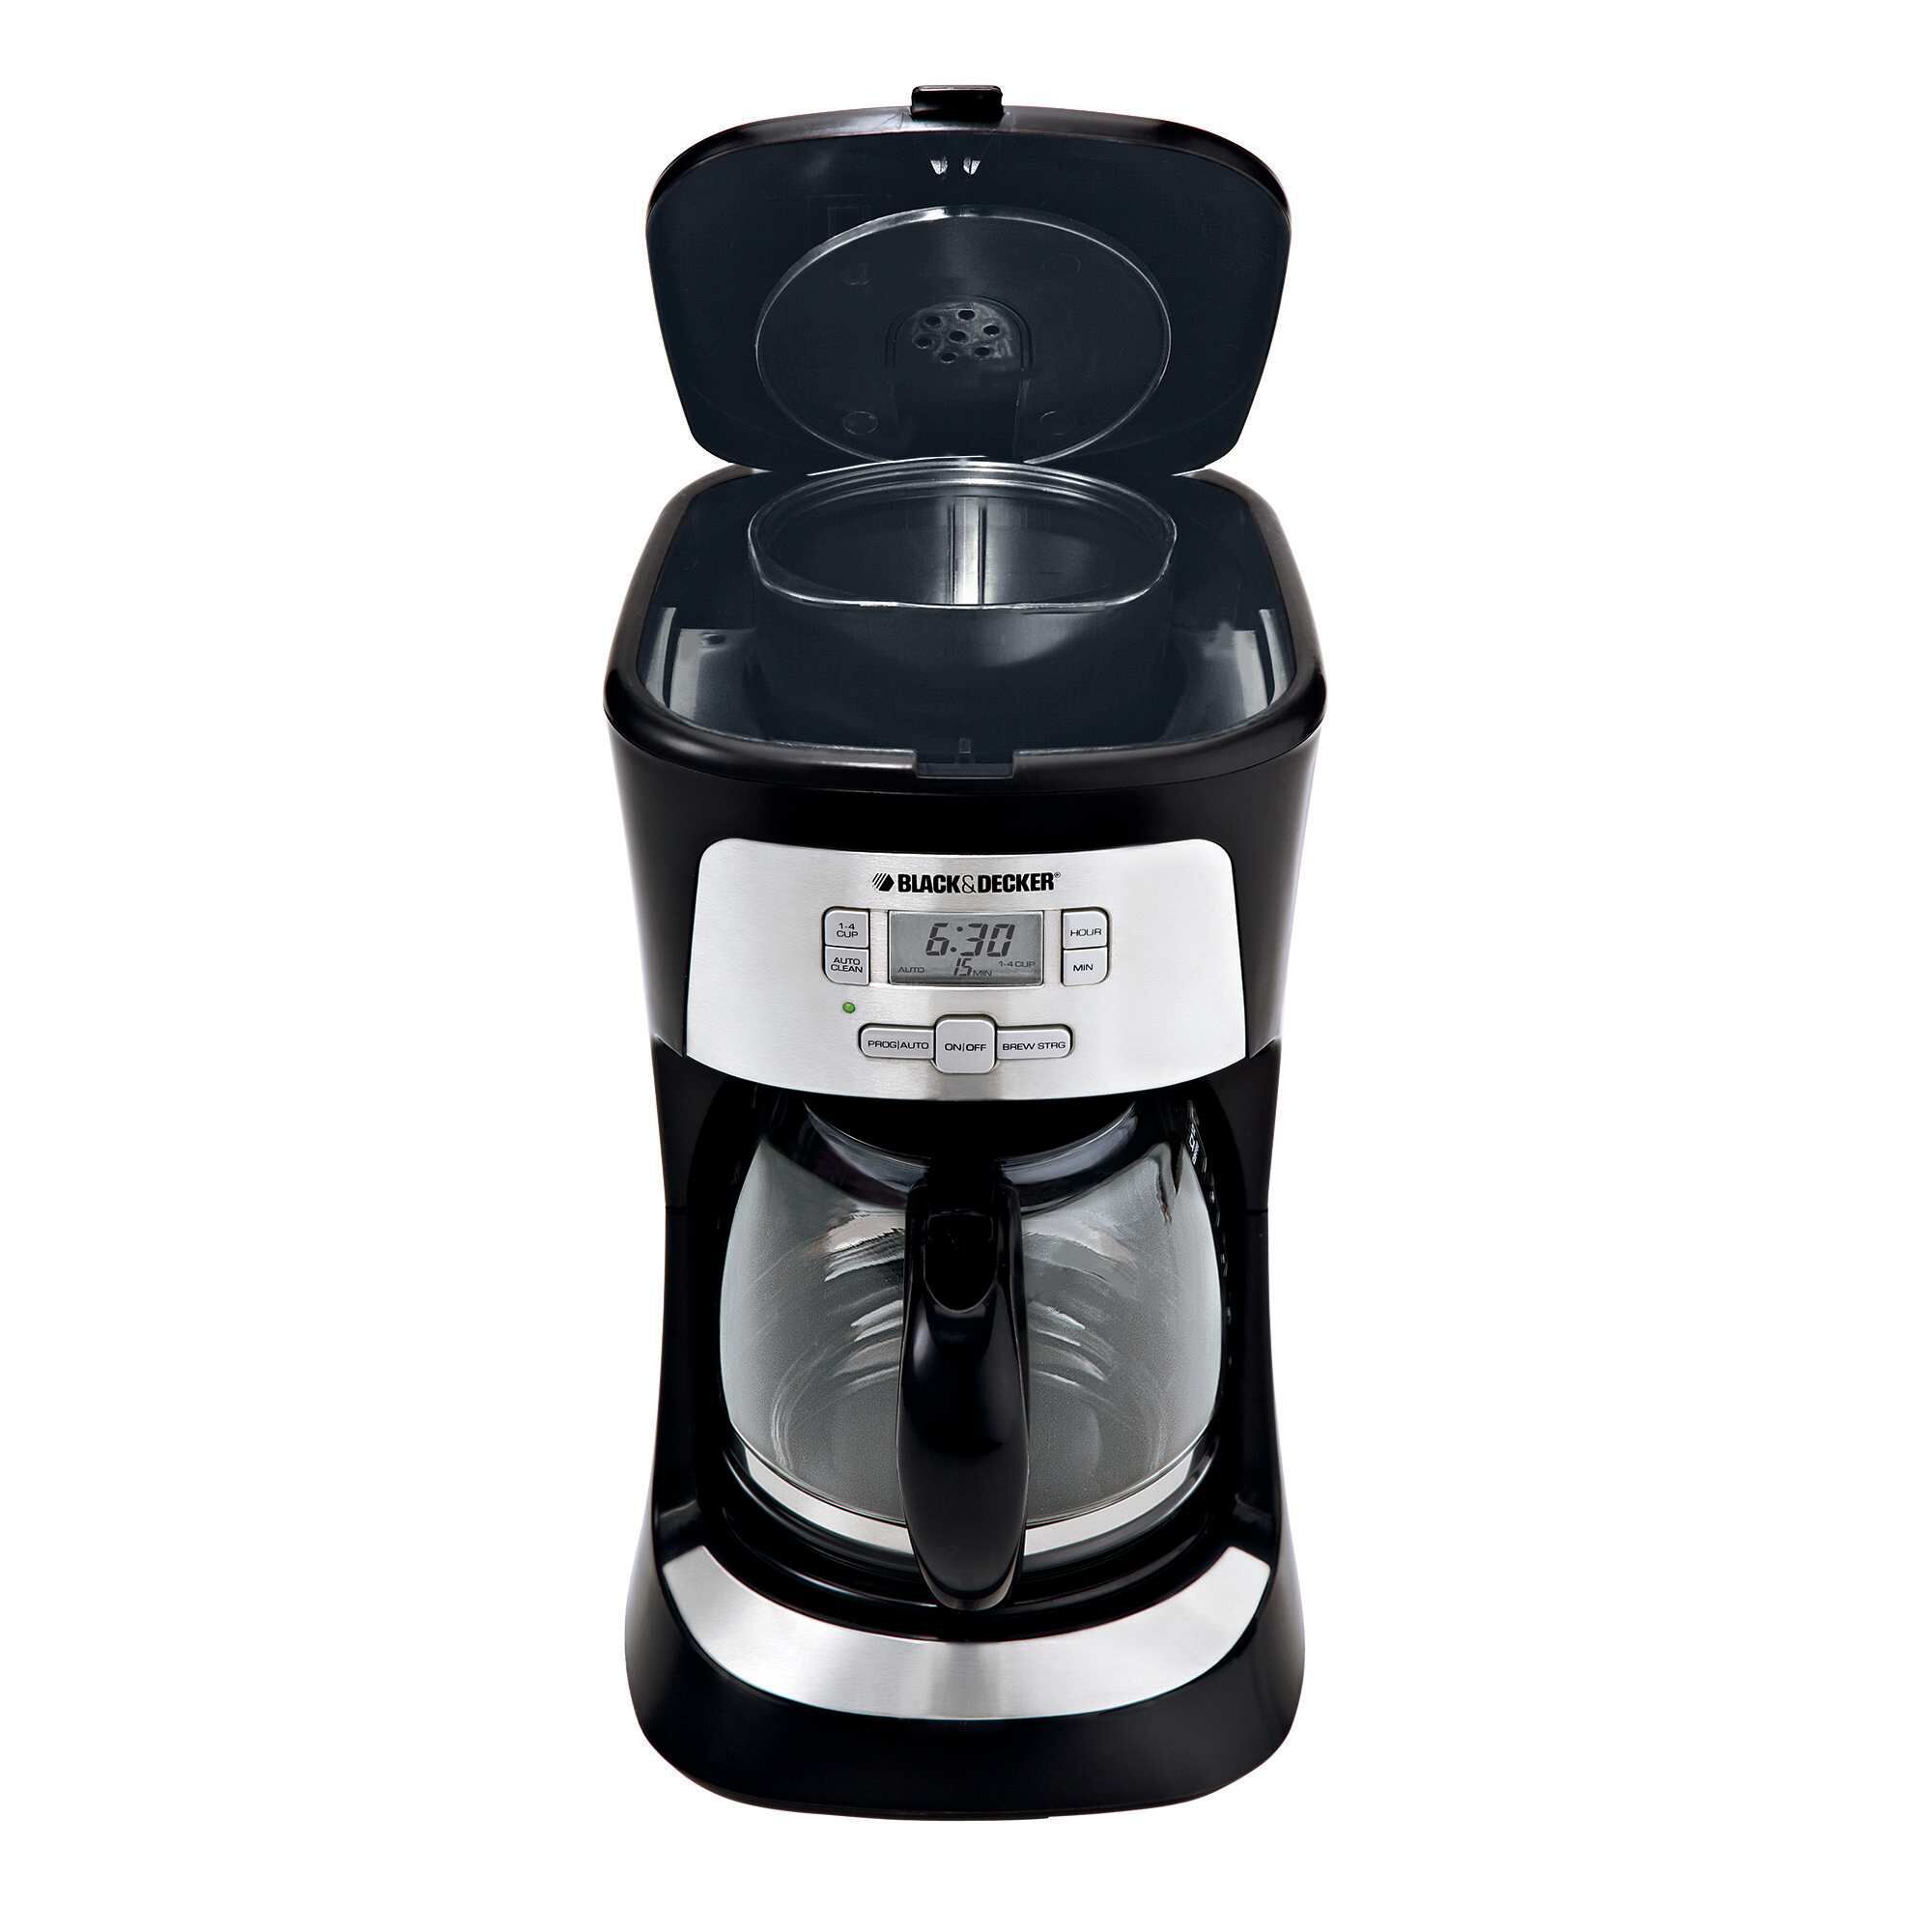 Profile of 12 Cup Programmable Coffee Maker with lid open.